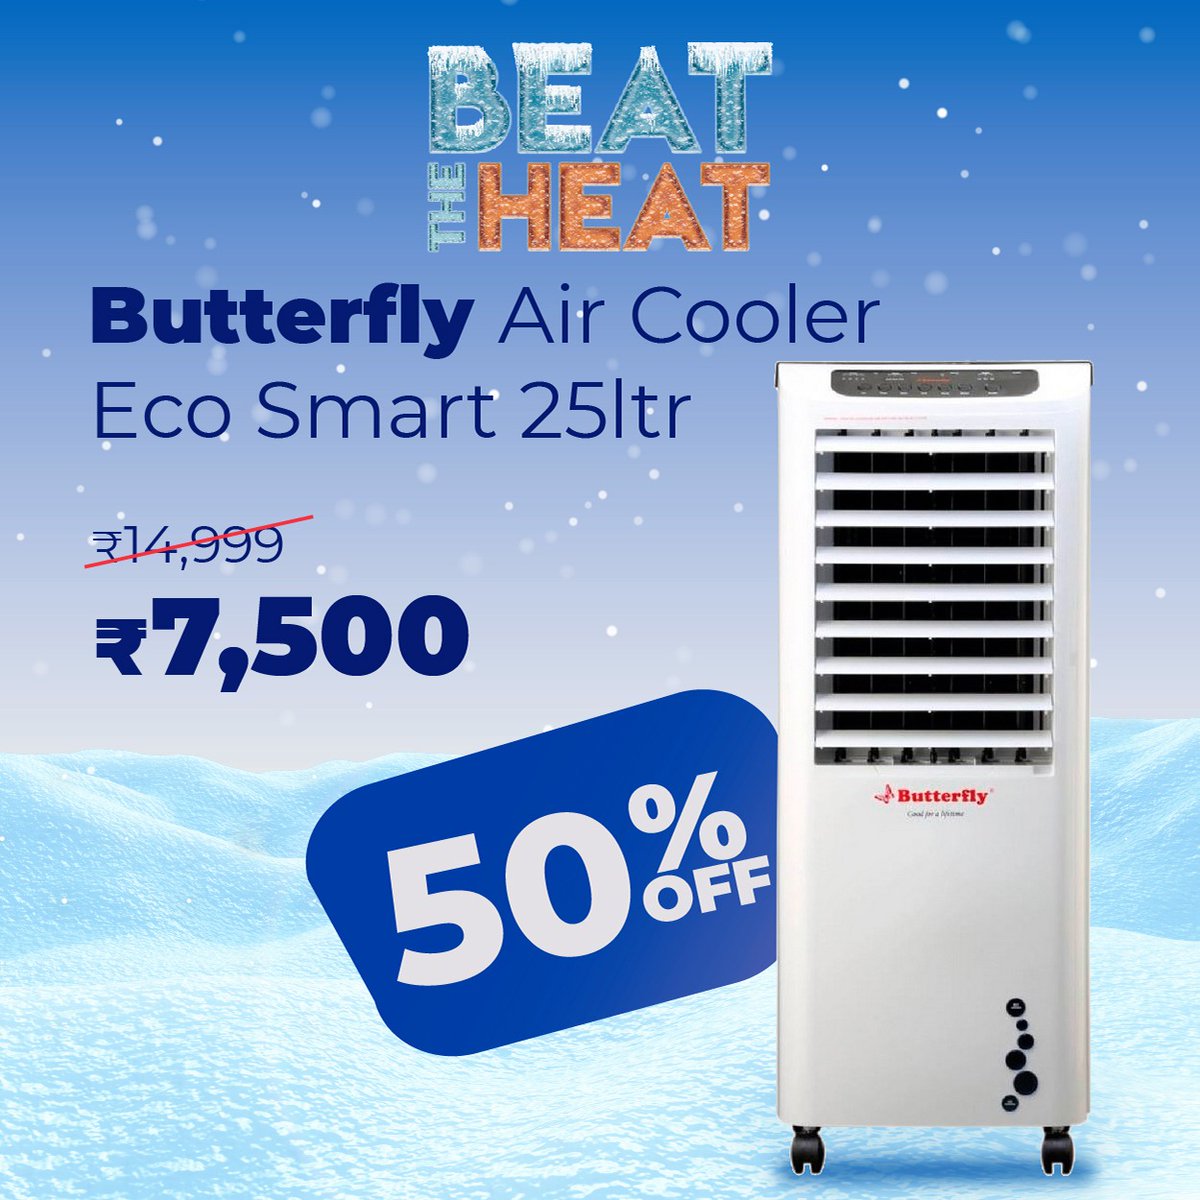 butterfly eco smart air cooler price